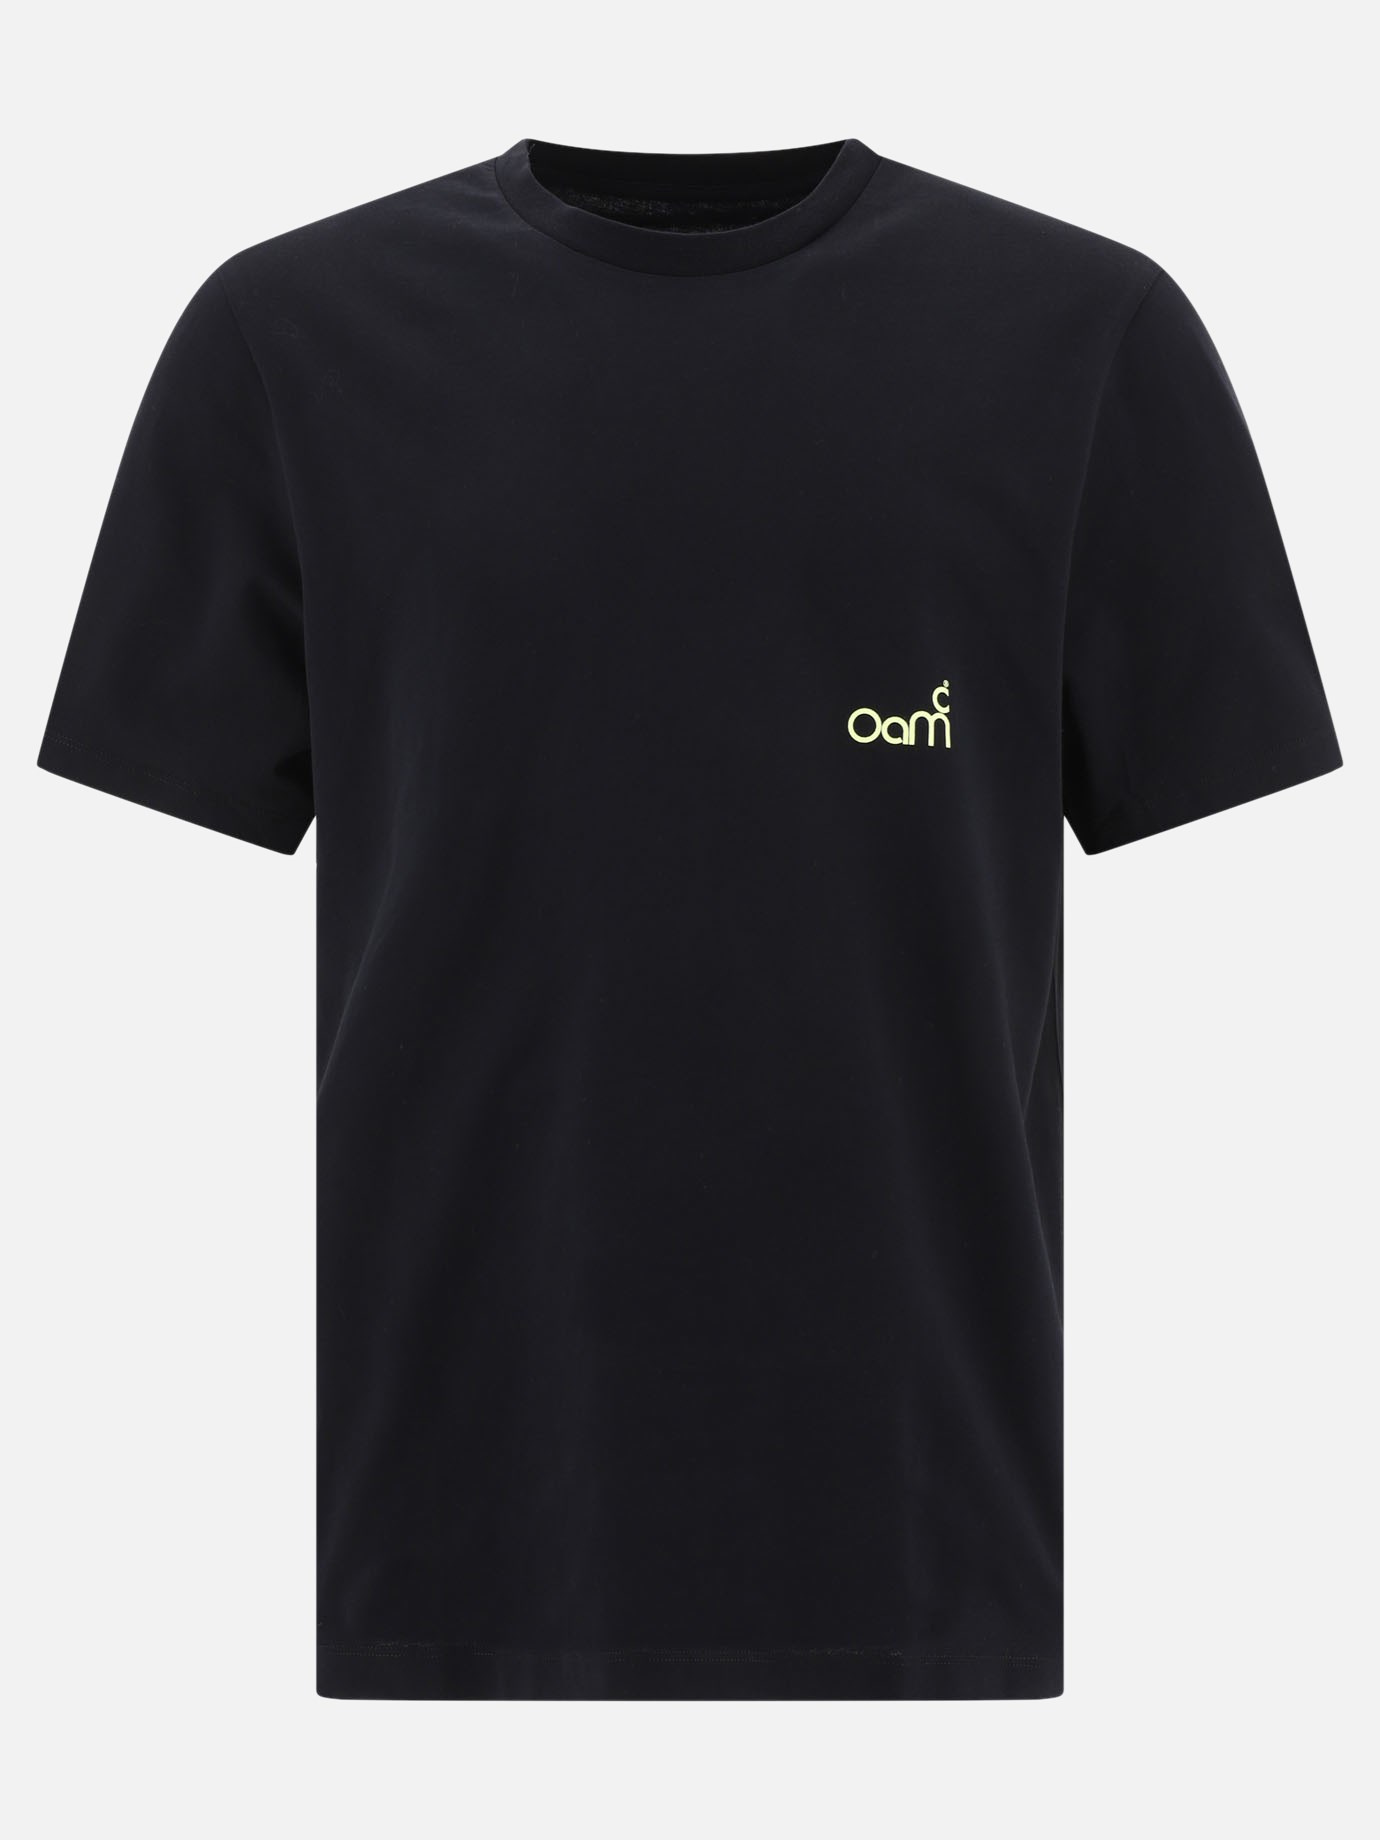  Oay  t-shirt by OAMC